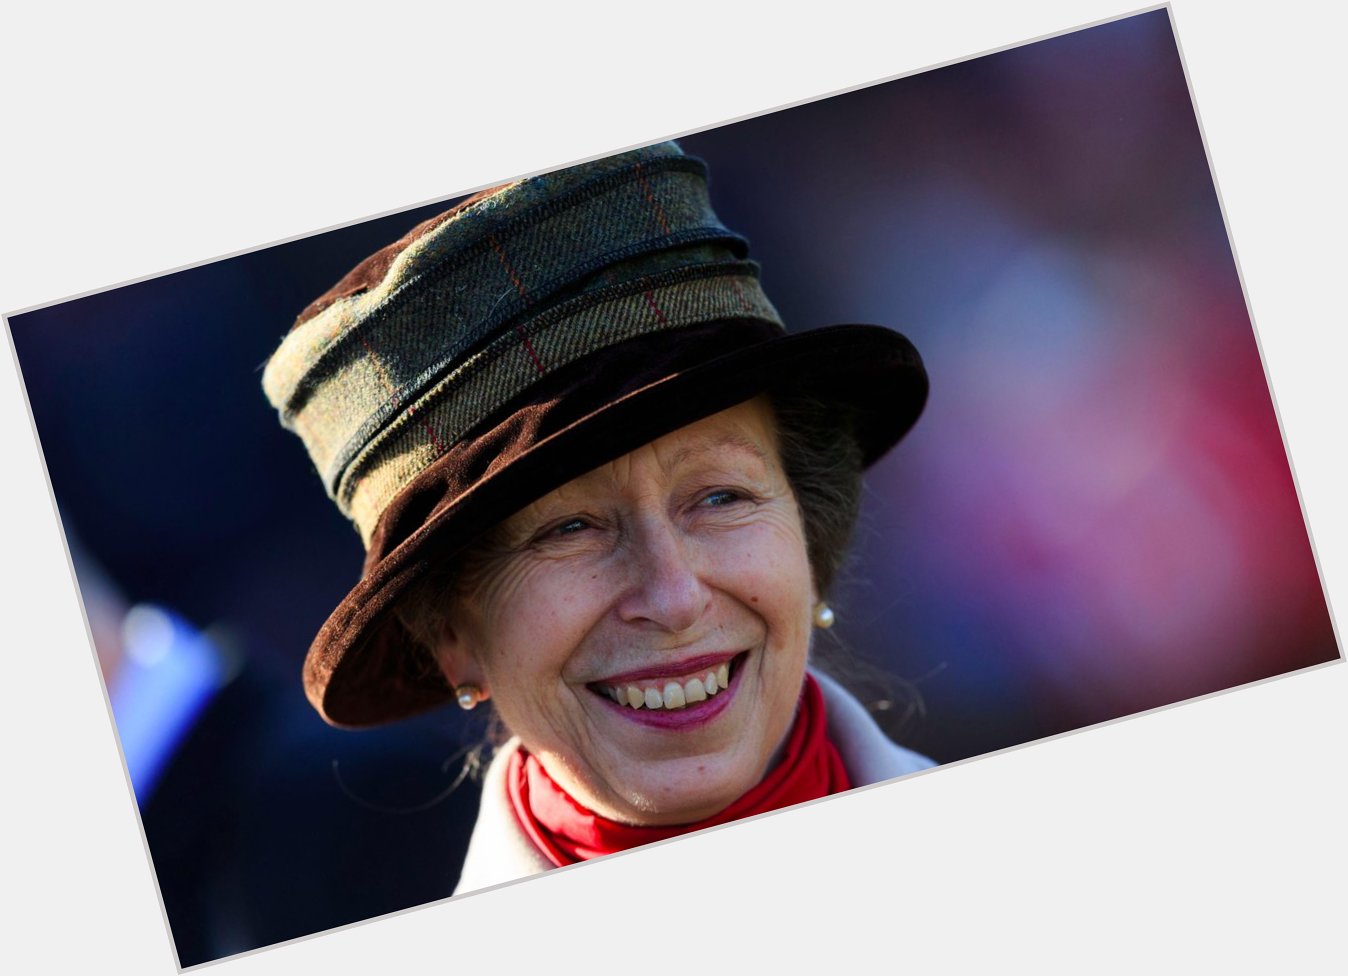 We wish happy birthday to Her Royal Highness, Princess Anne 